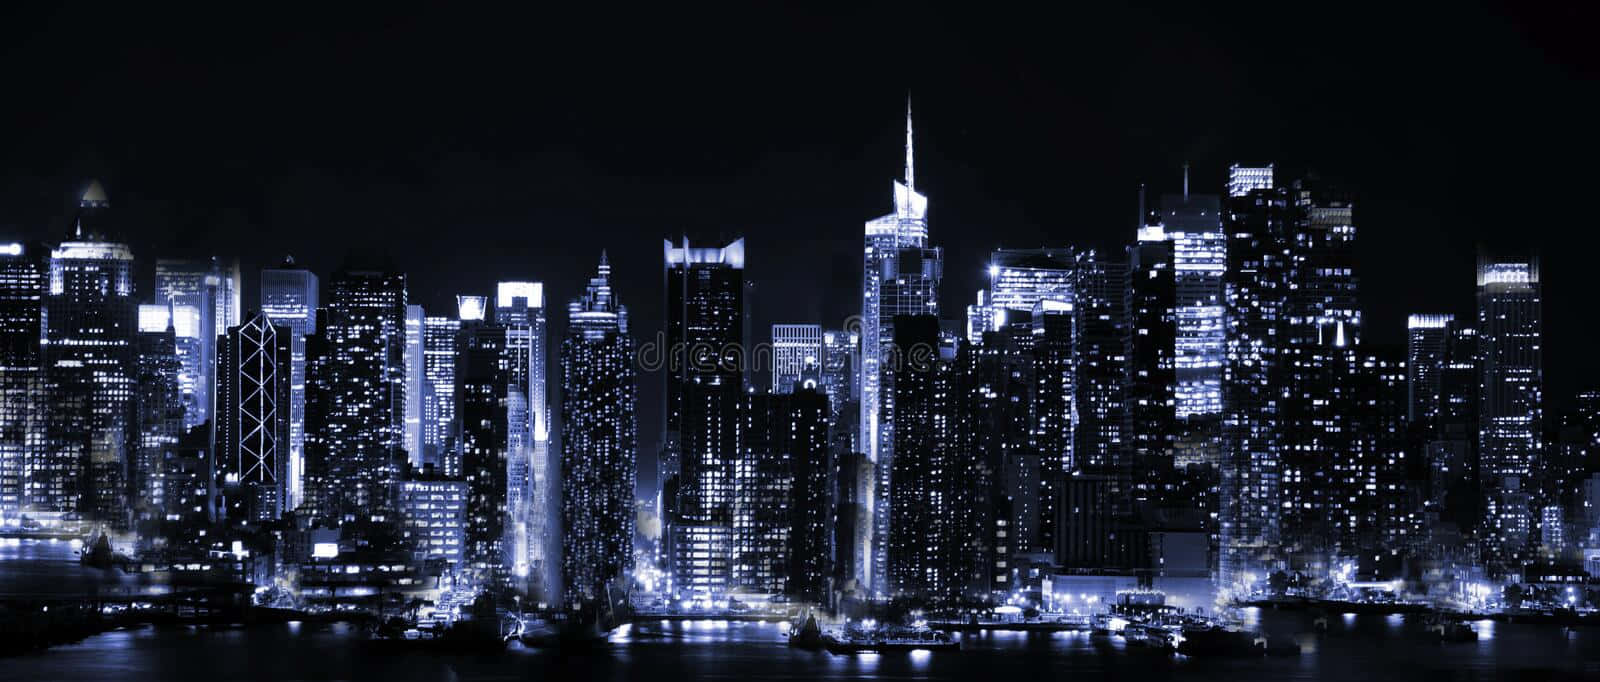 The night life of Night City shine brighter than ever.